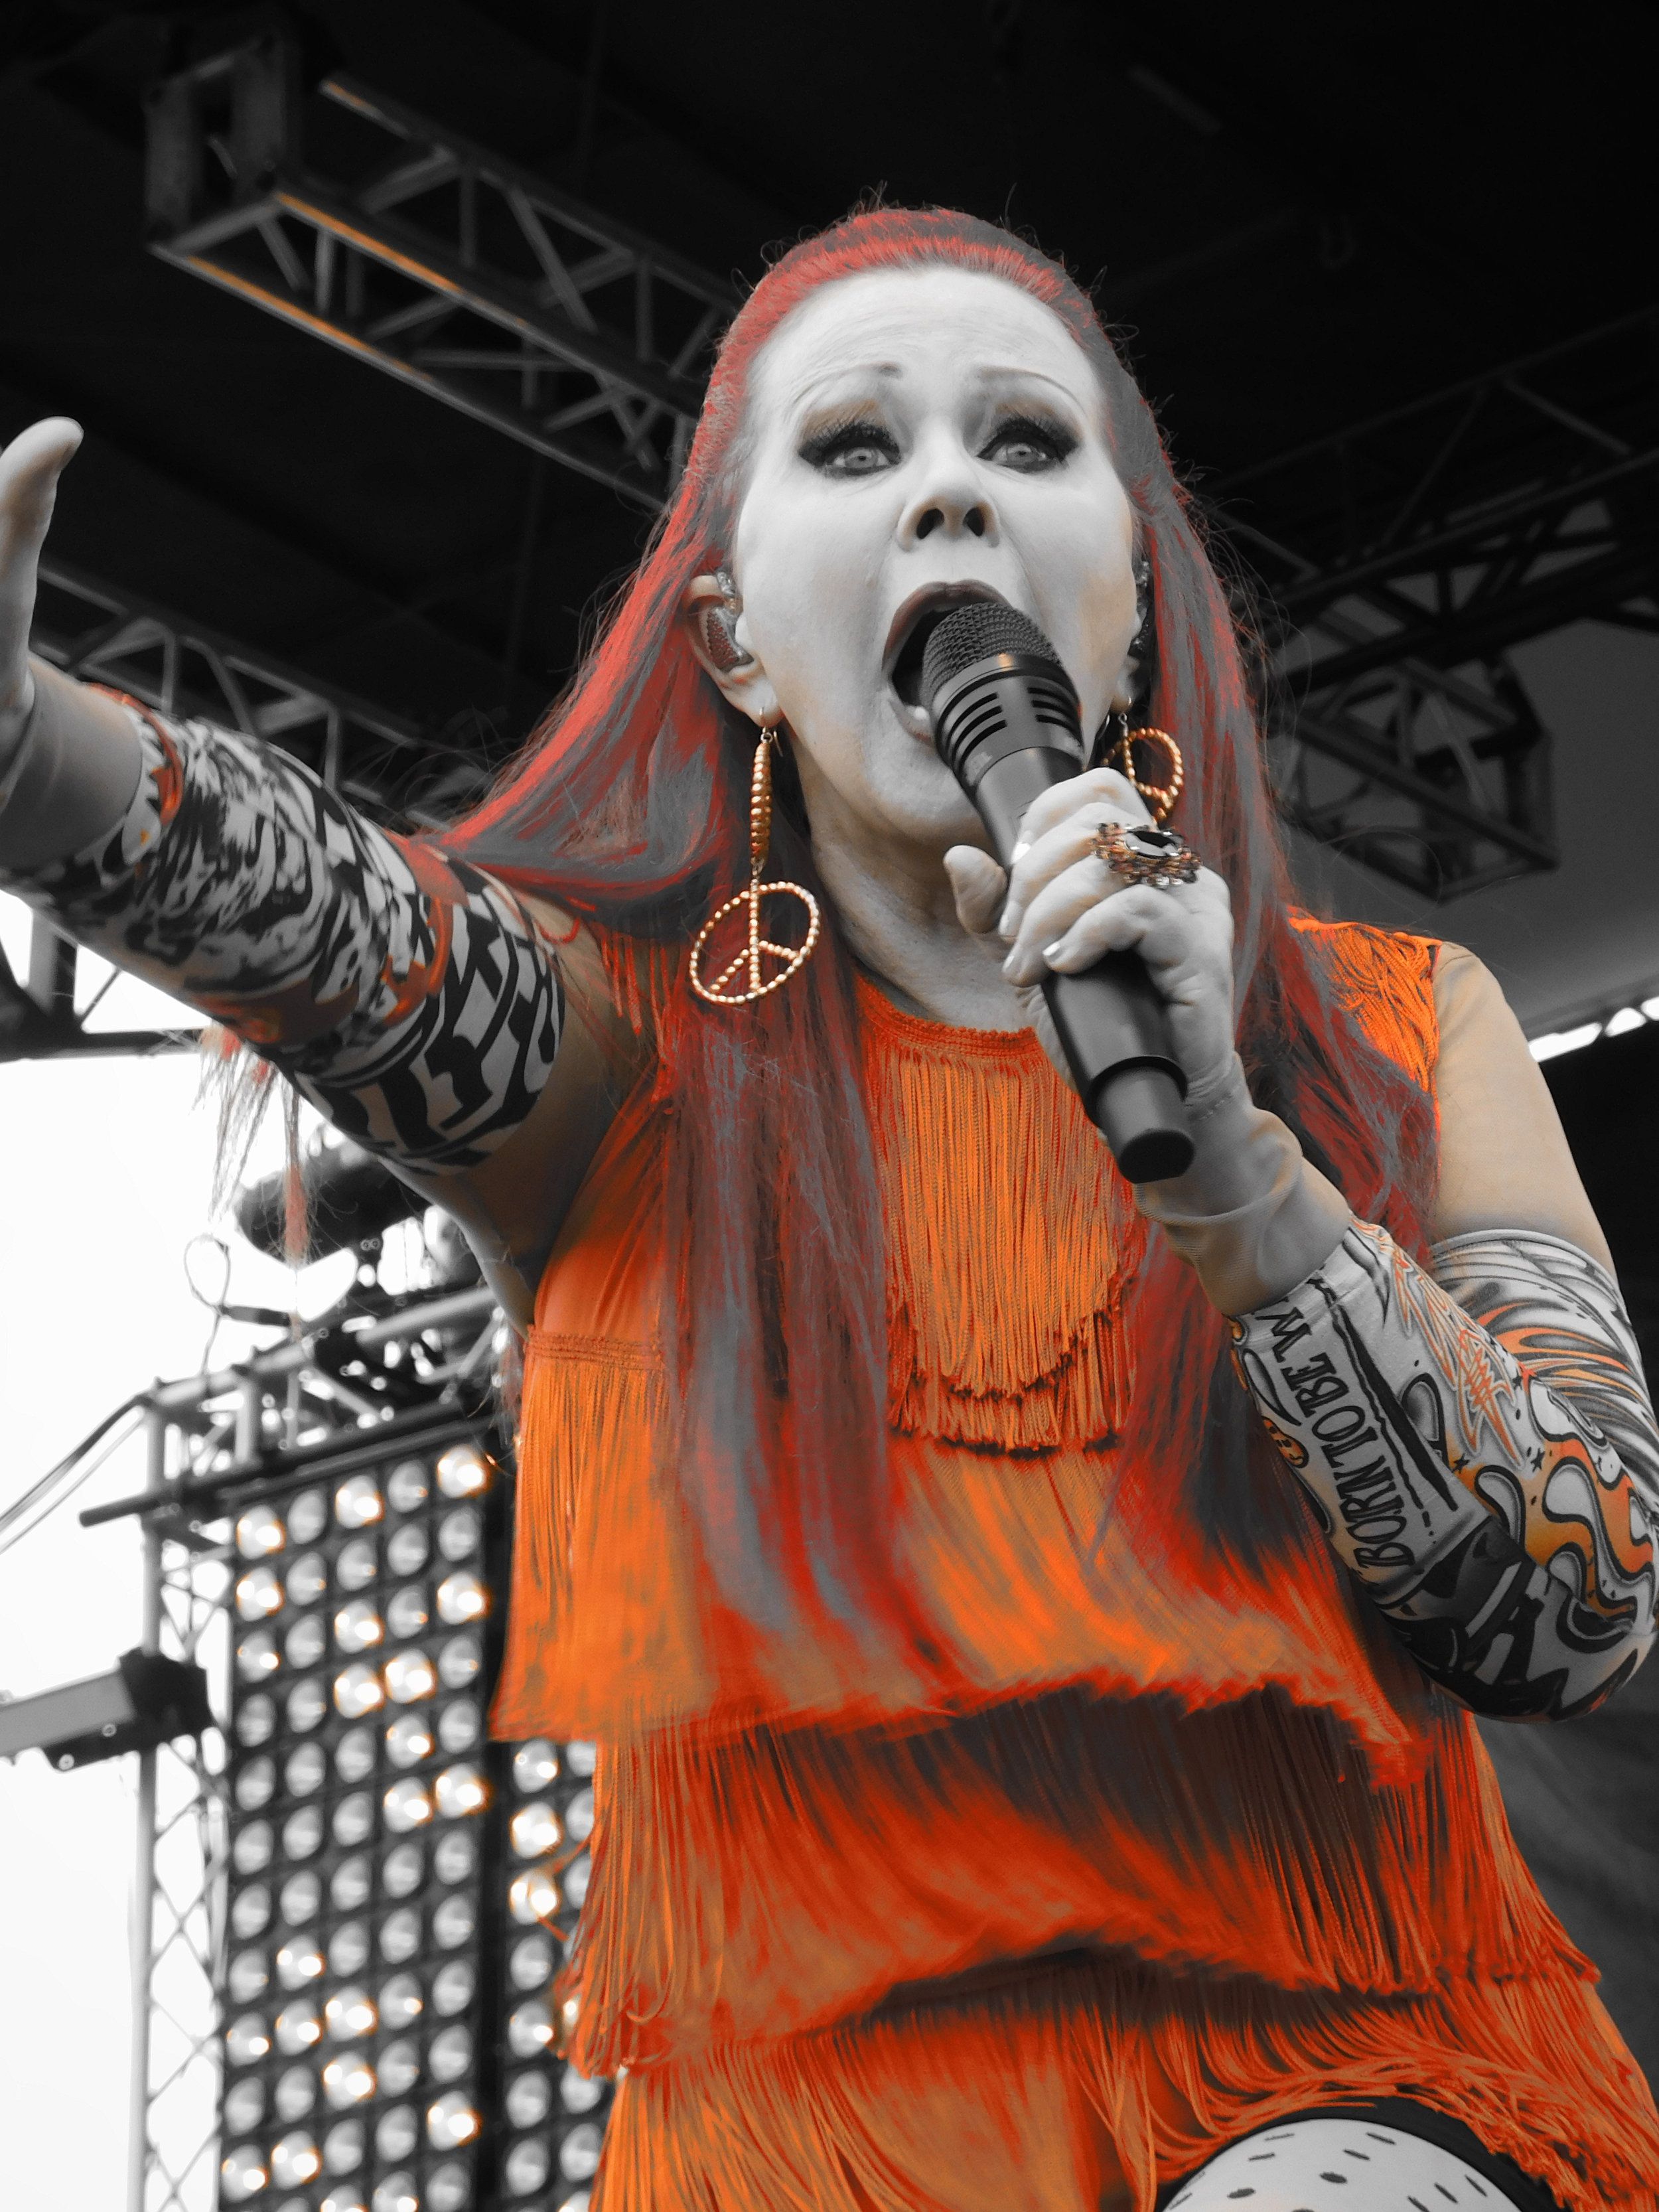  Kate Pierson of The B-52s 